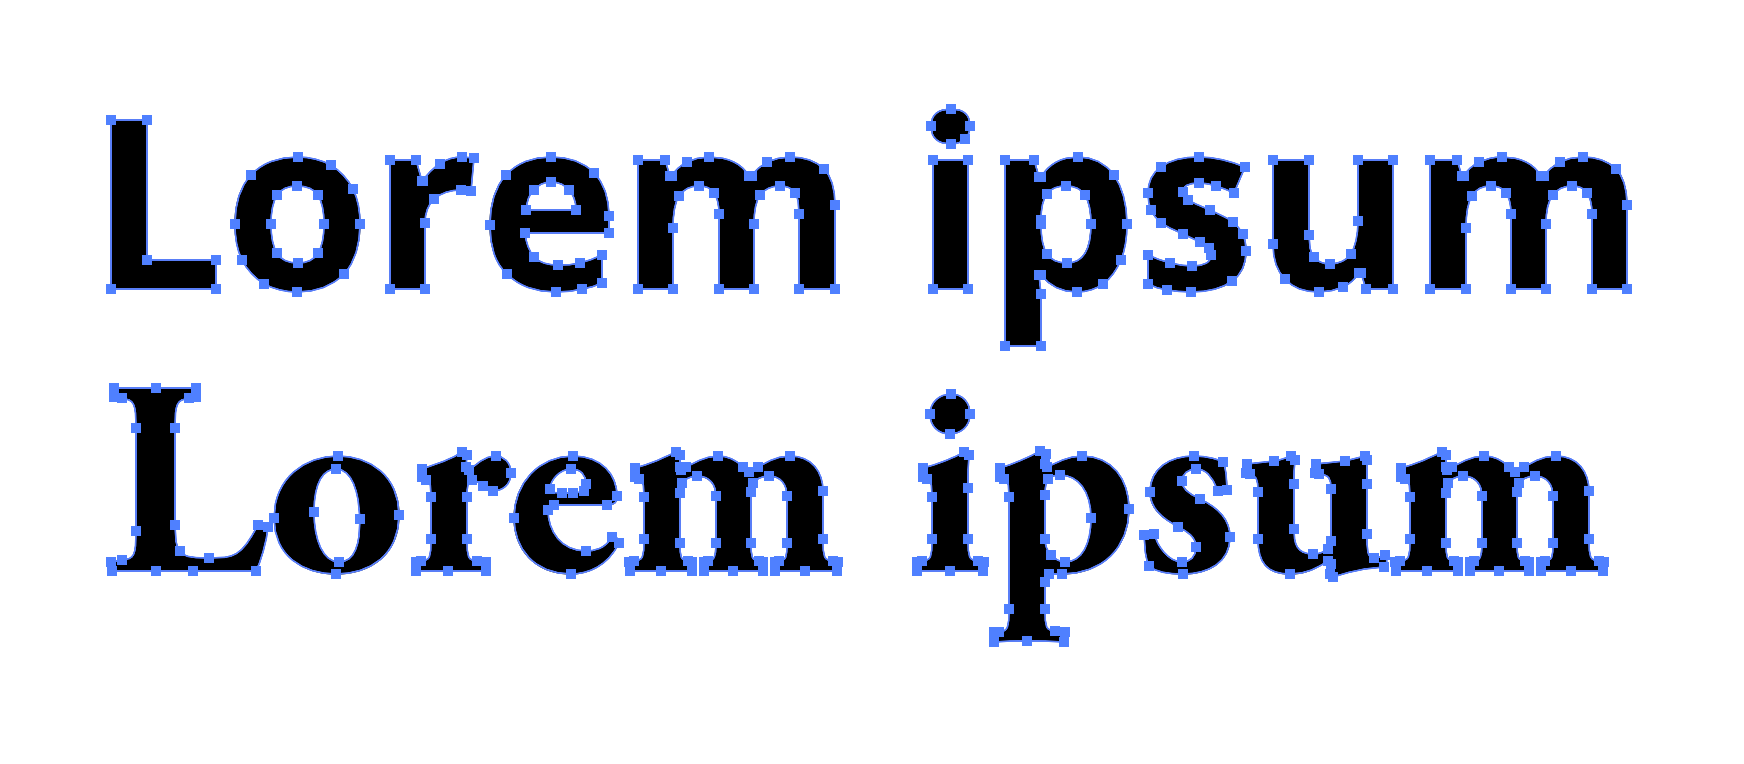 The vector points on the letters of Lorem Ipsum text shown on Open Sans and Garamond. It's not incredibly dramatic, but there are more points on Garamond